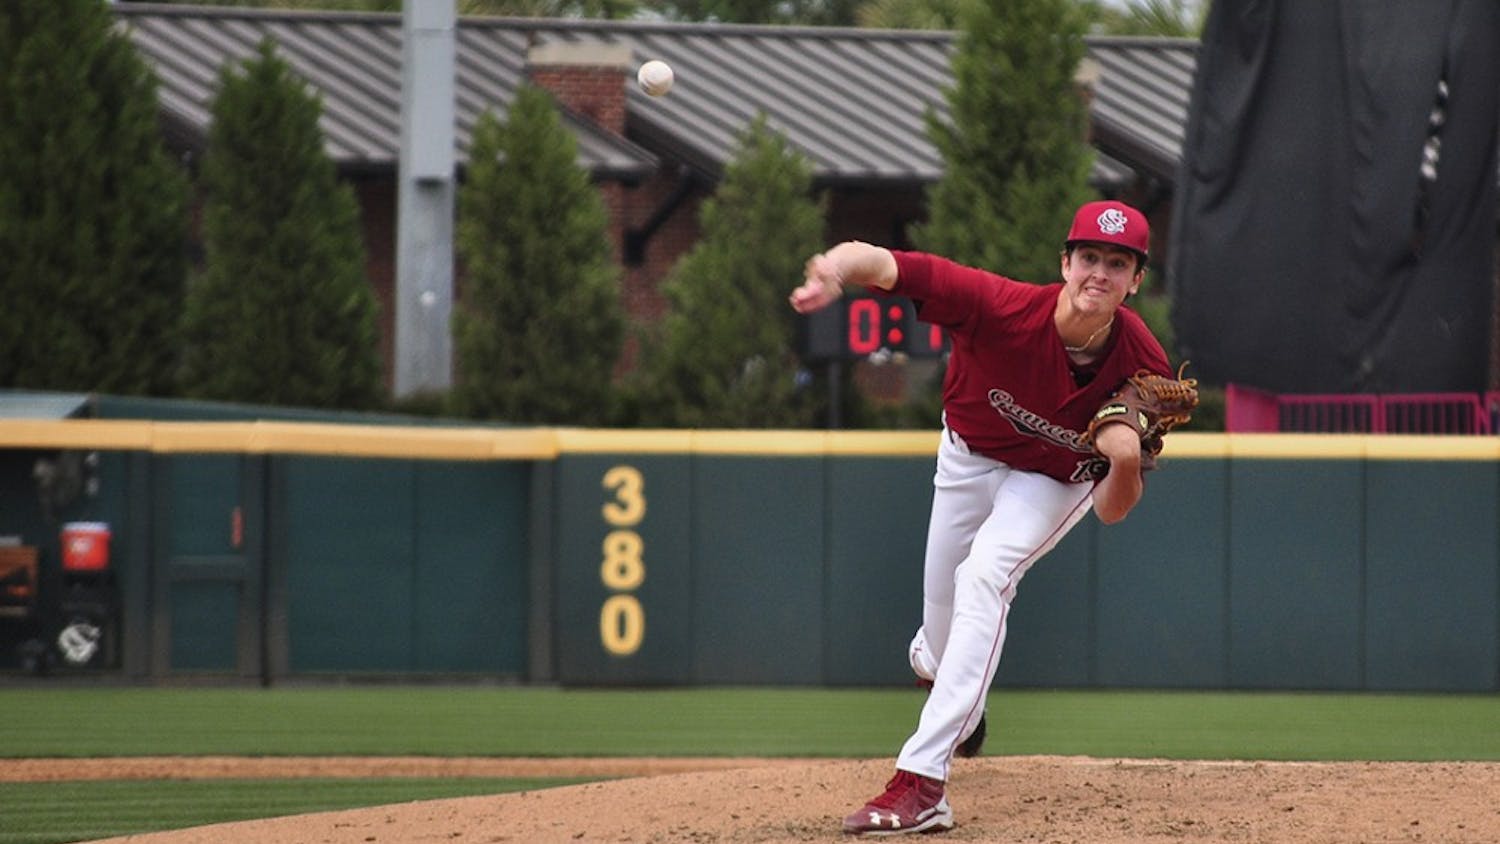 Freshman pitcher&nbsp;Adam Hill had five hits against him in 5.1 innings pitched, bringing his ERA up to 2.87.